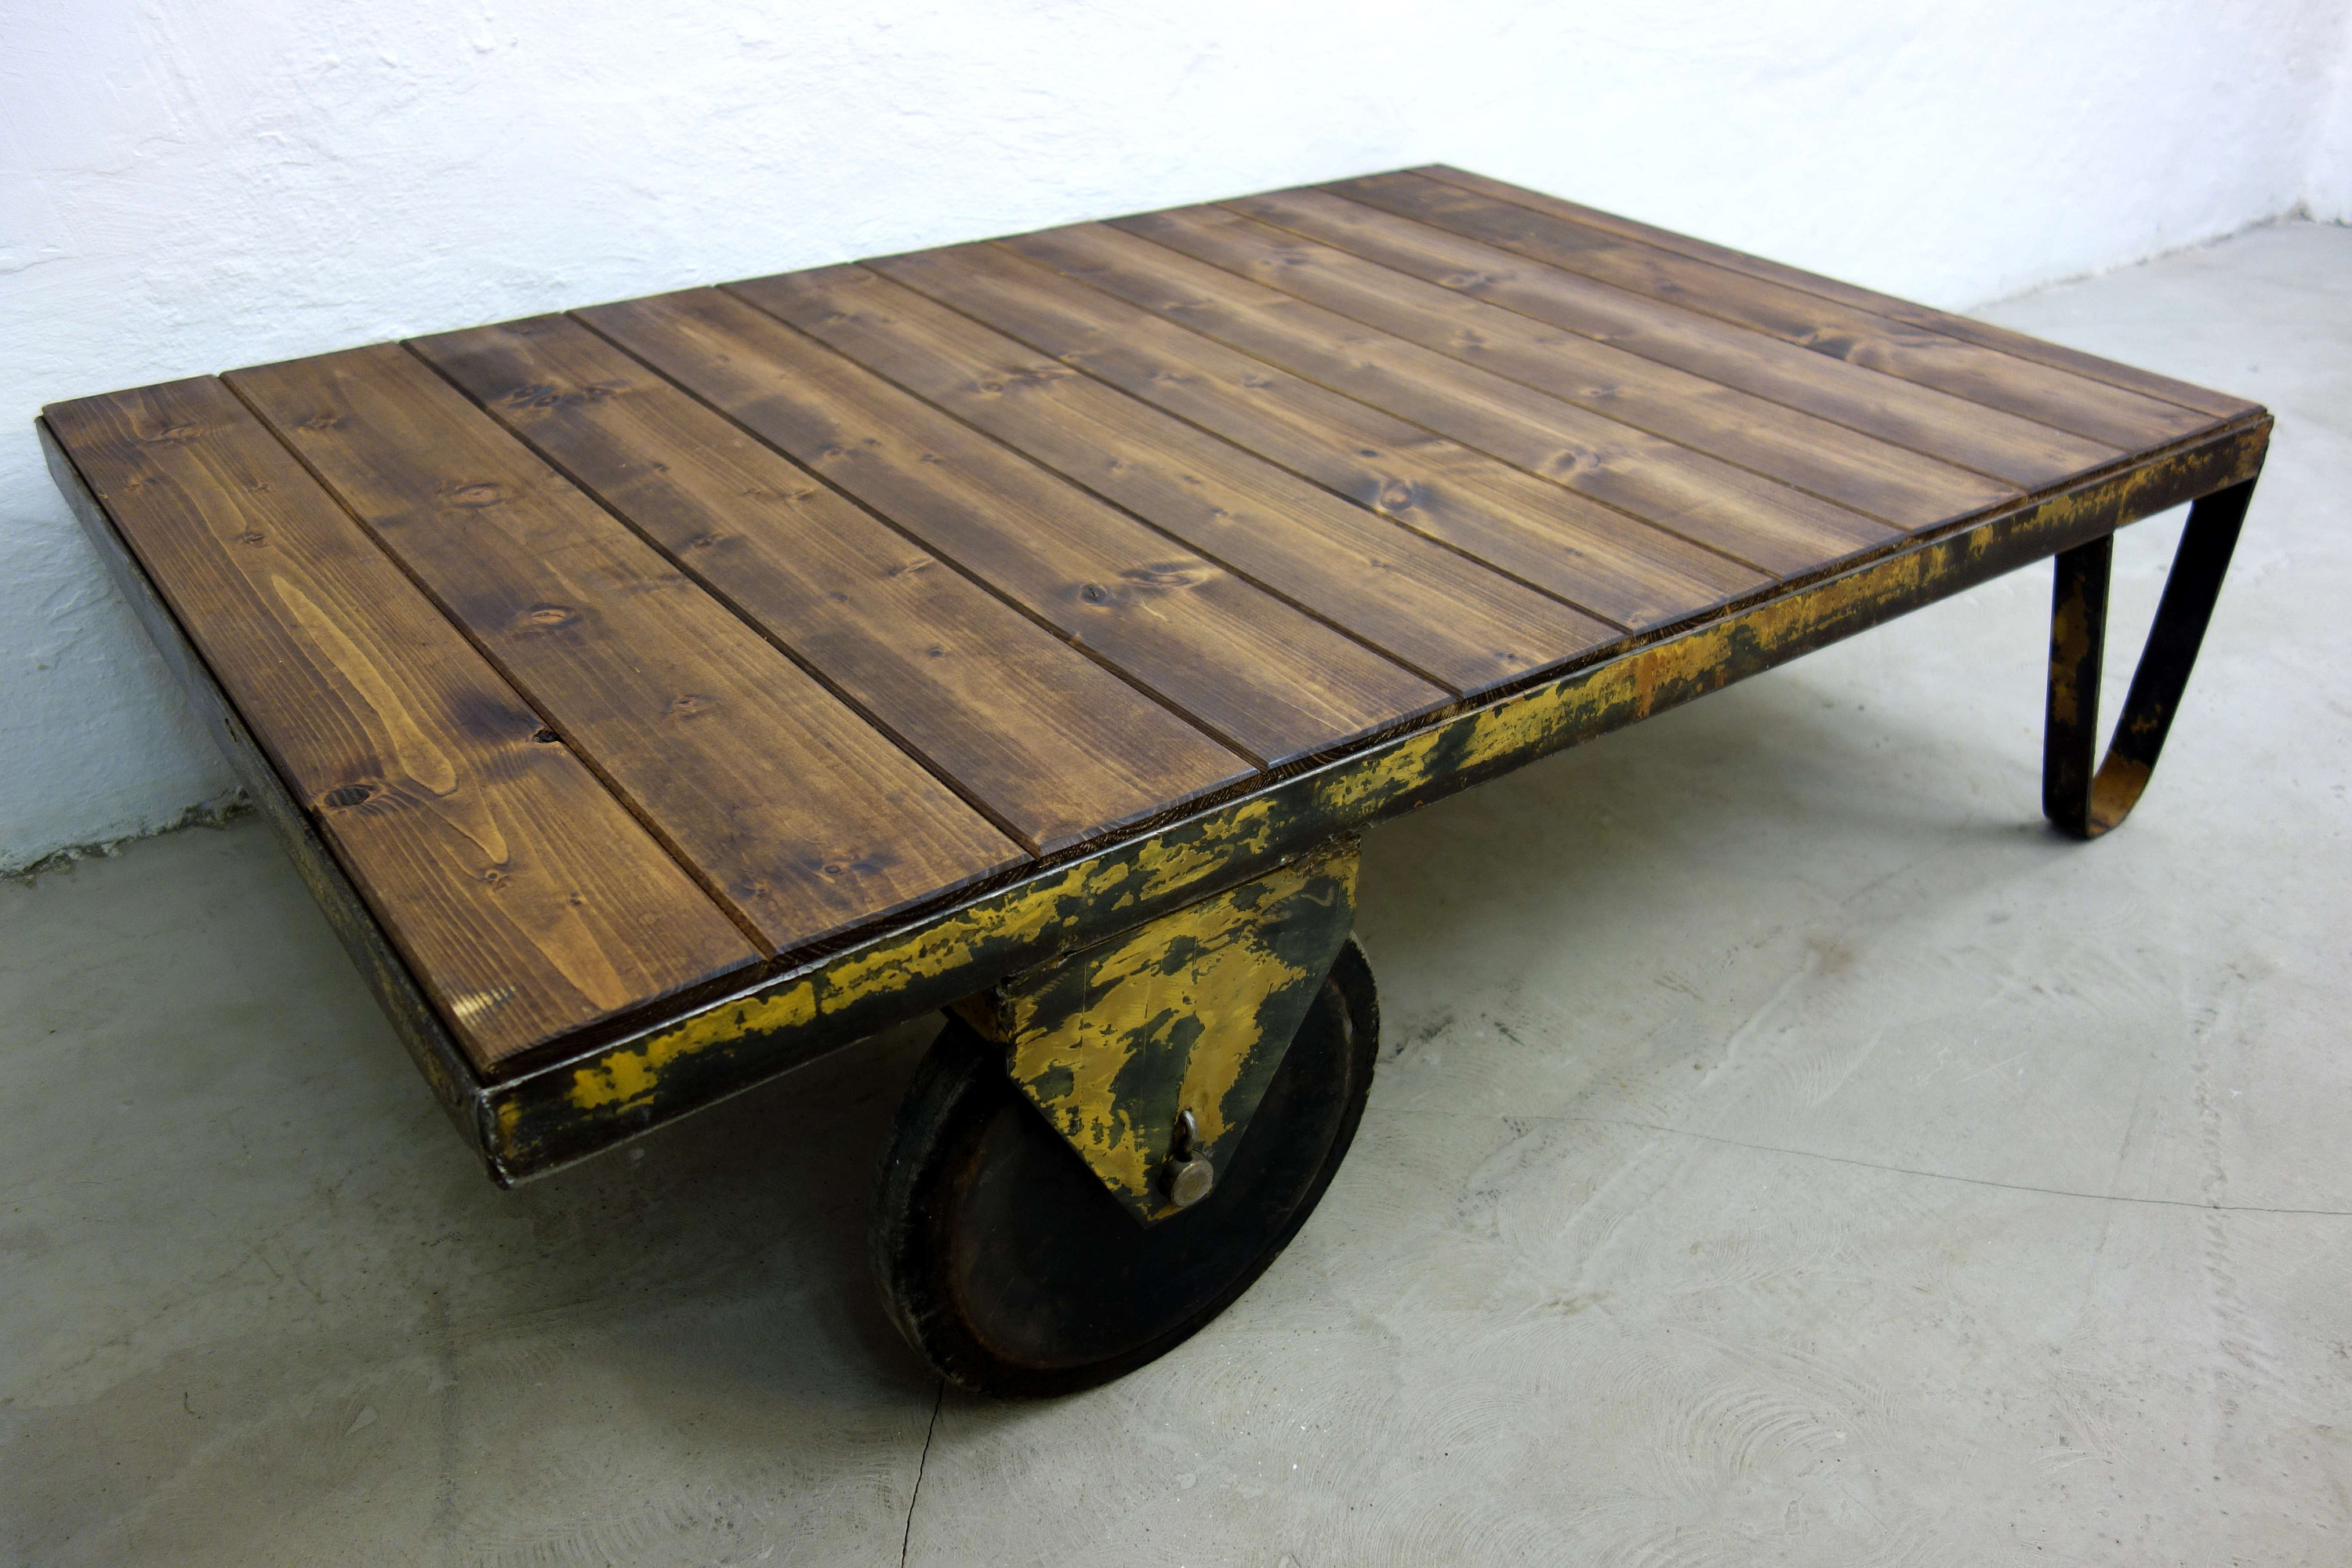 Vintage Industrial Design Coffee Table Industrial Design Table Etsy within sizing 3000 X 2000